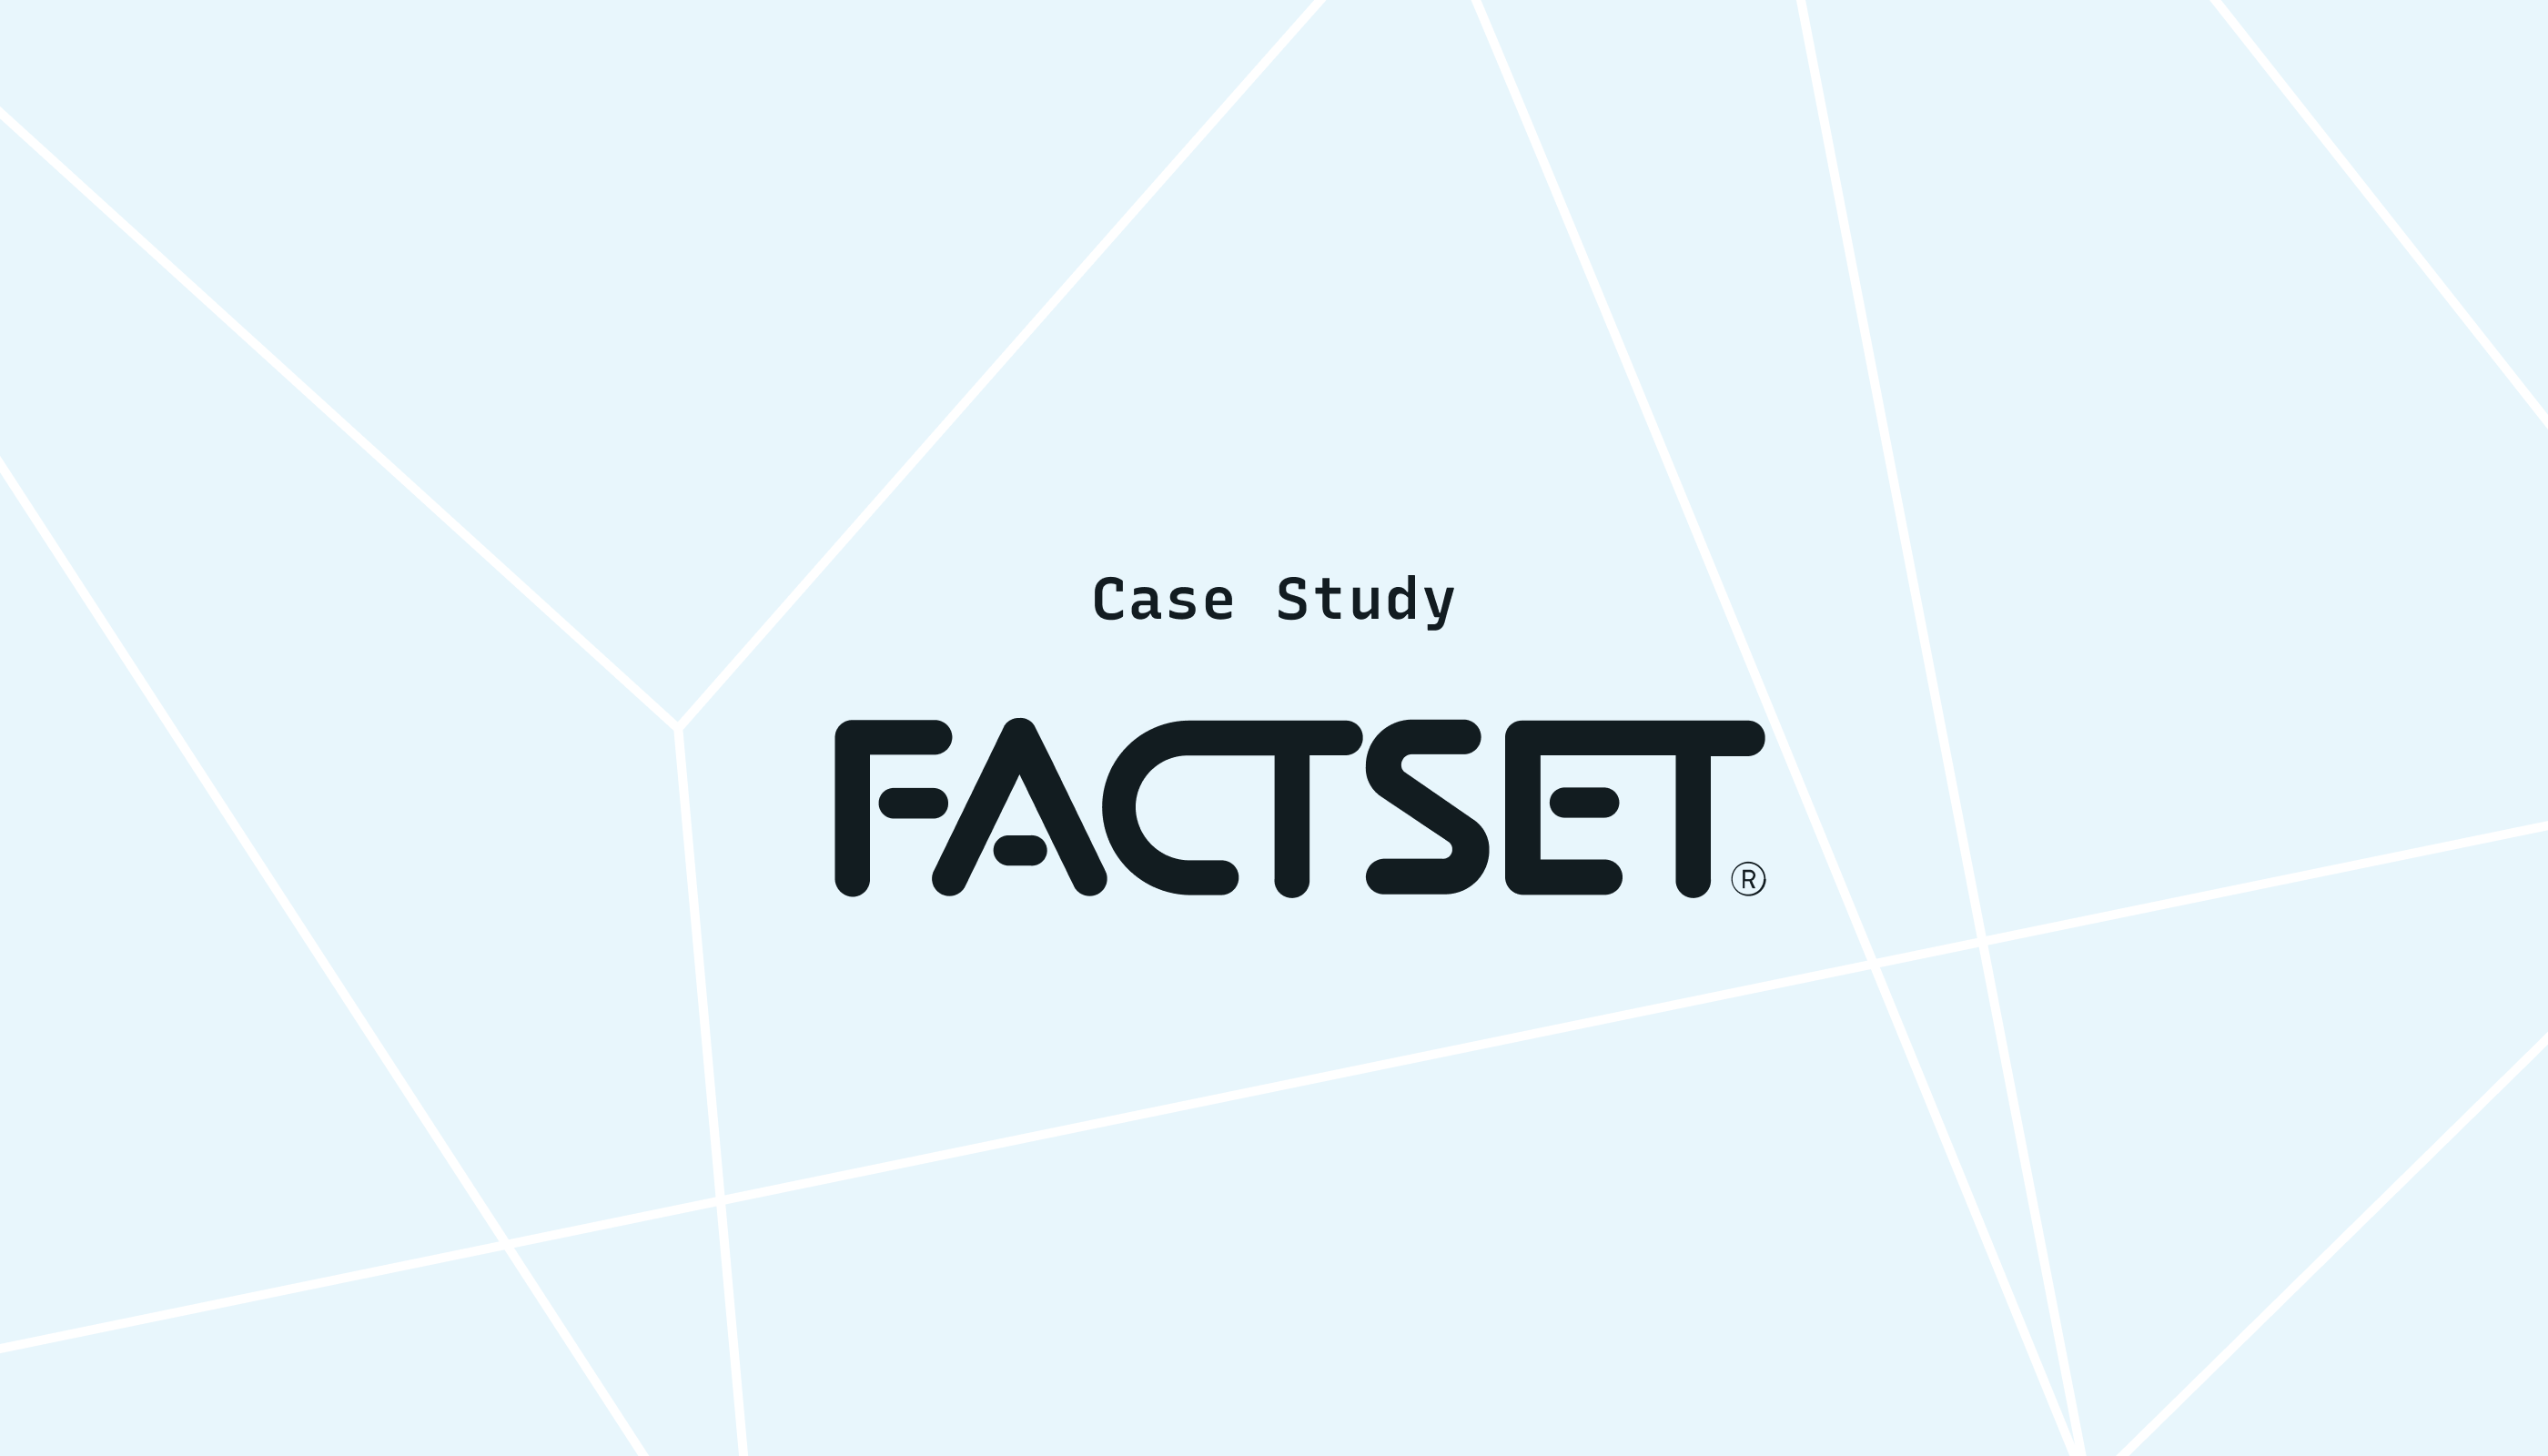 FactSet increases developer efficiency, improves workflows, and reduces MTTR with Lightstep